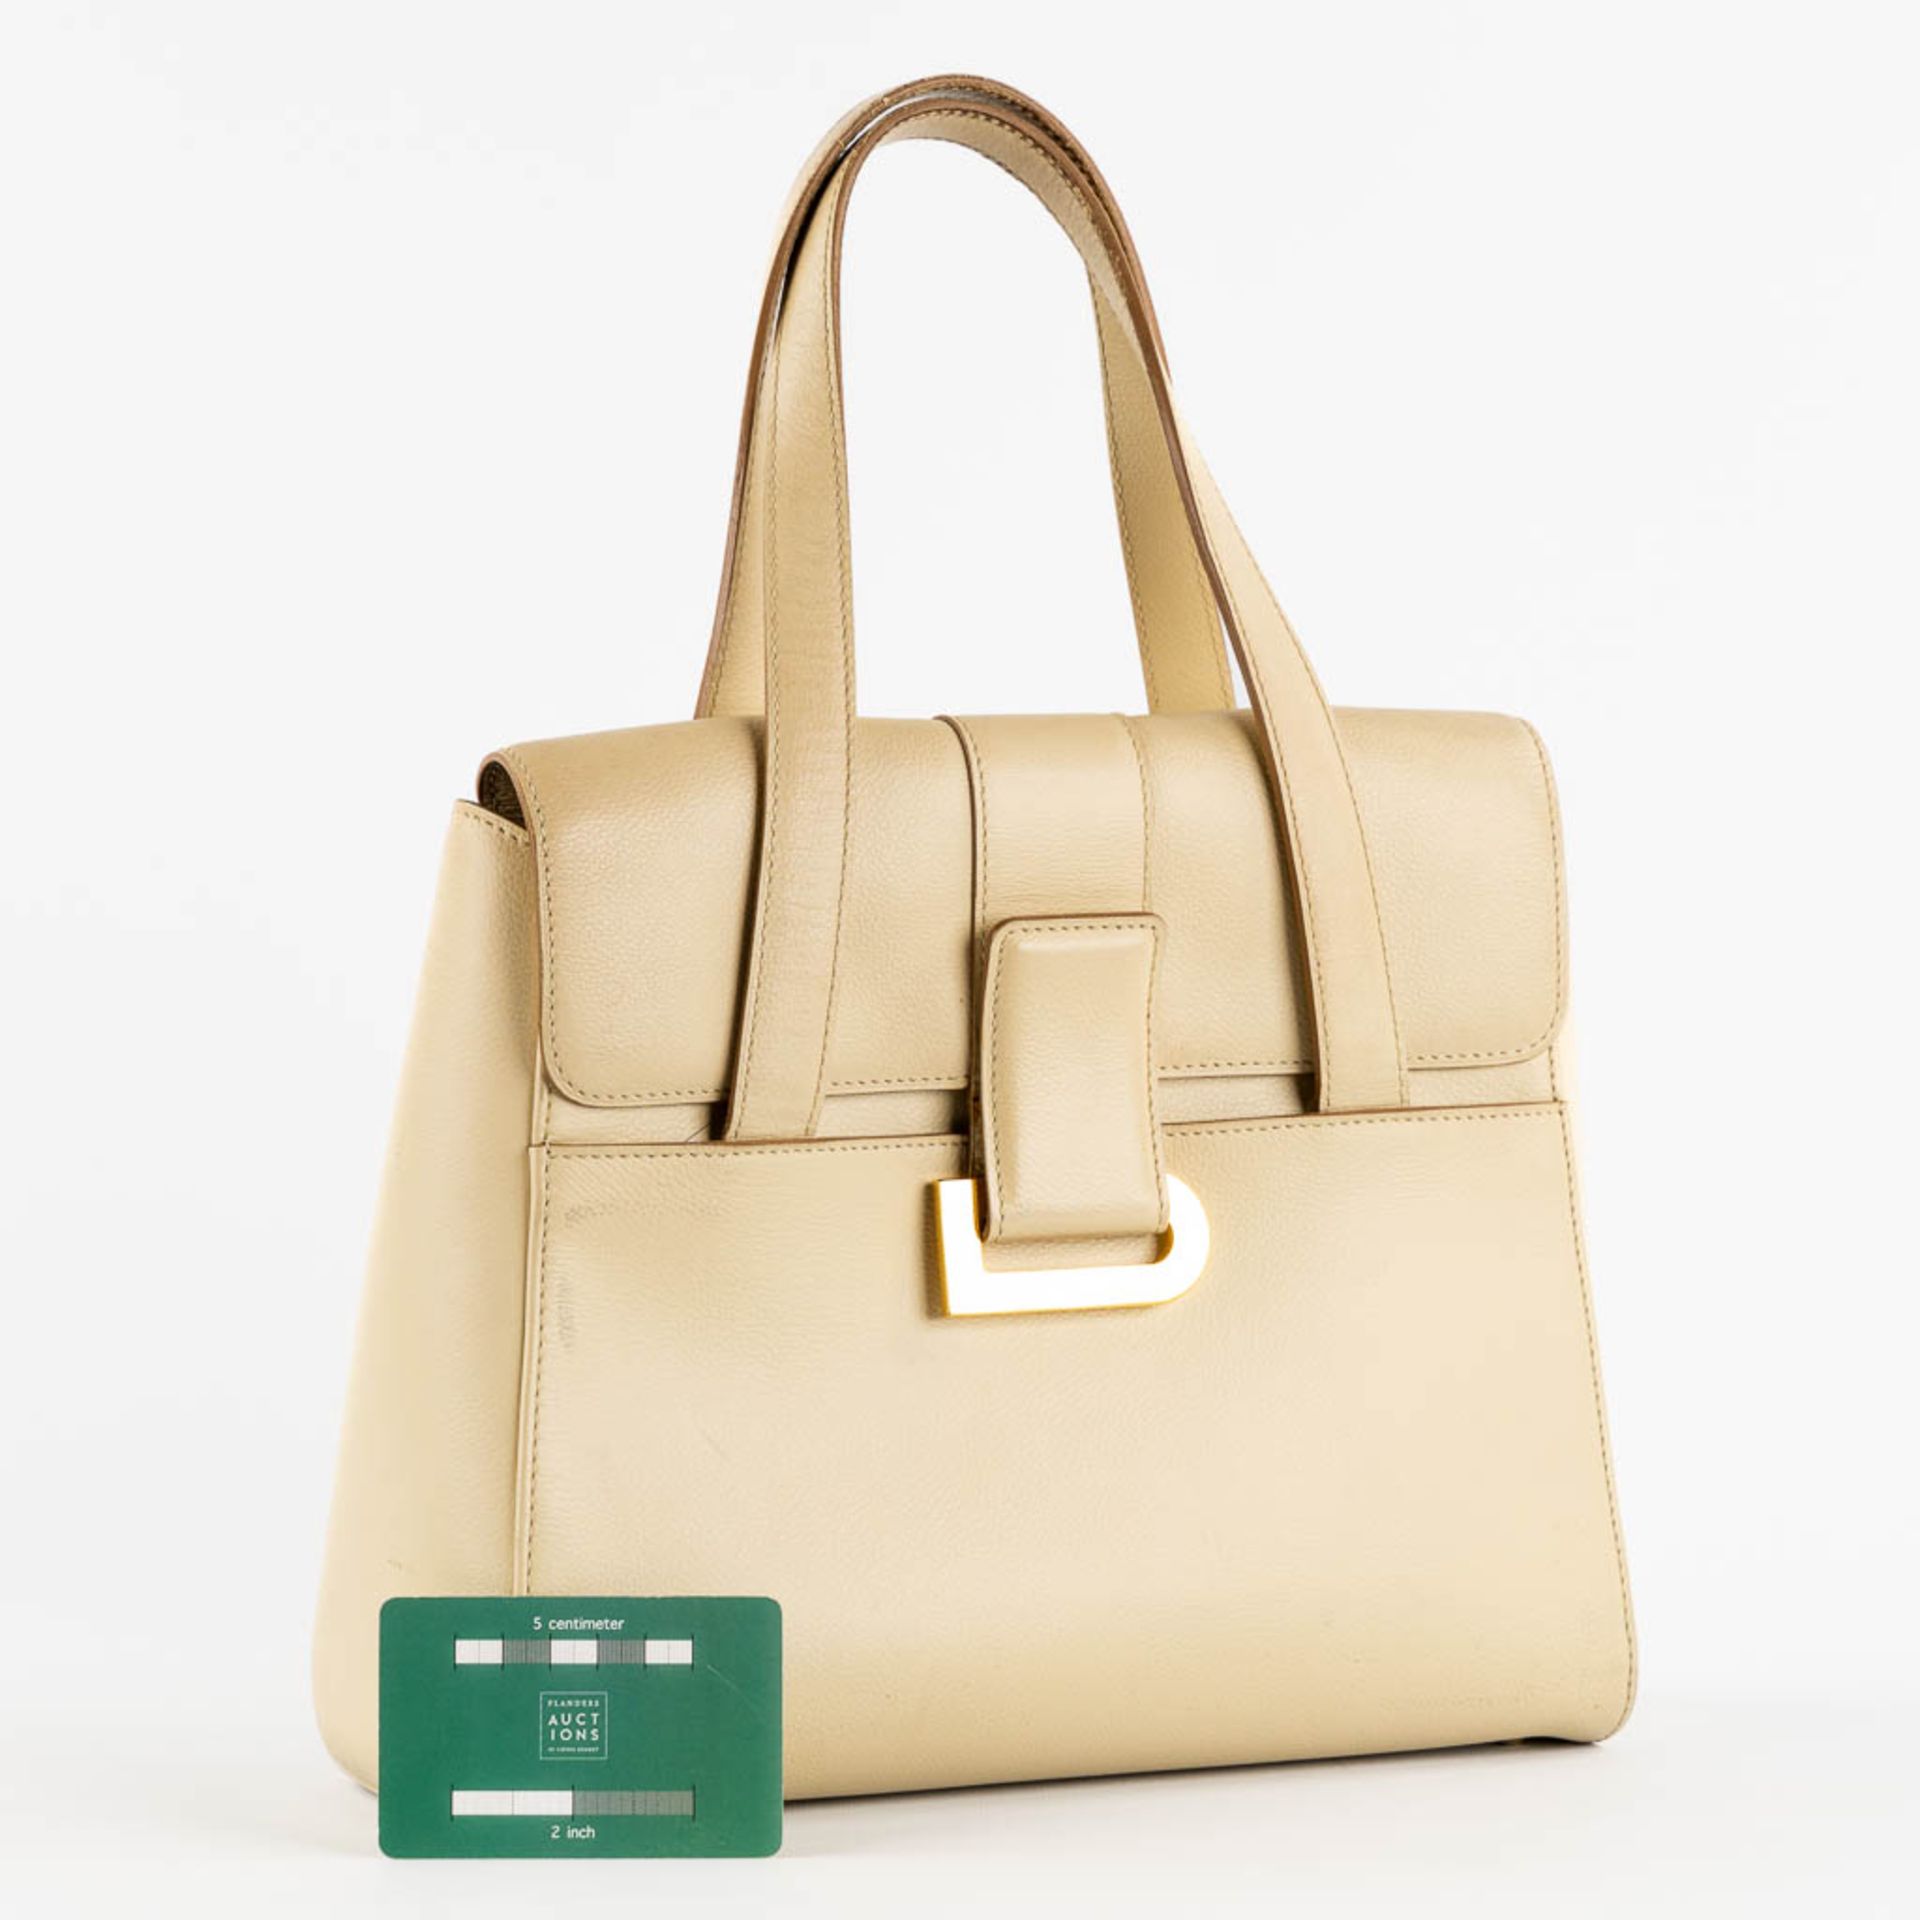 Delvaux model 'Reverie' Jumping, Ivoire. Ivory coloured leather. (L:11 x W:28 x H:23 cm) - Image 2 of 20